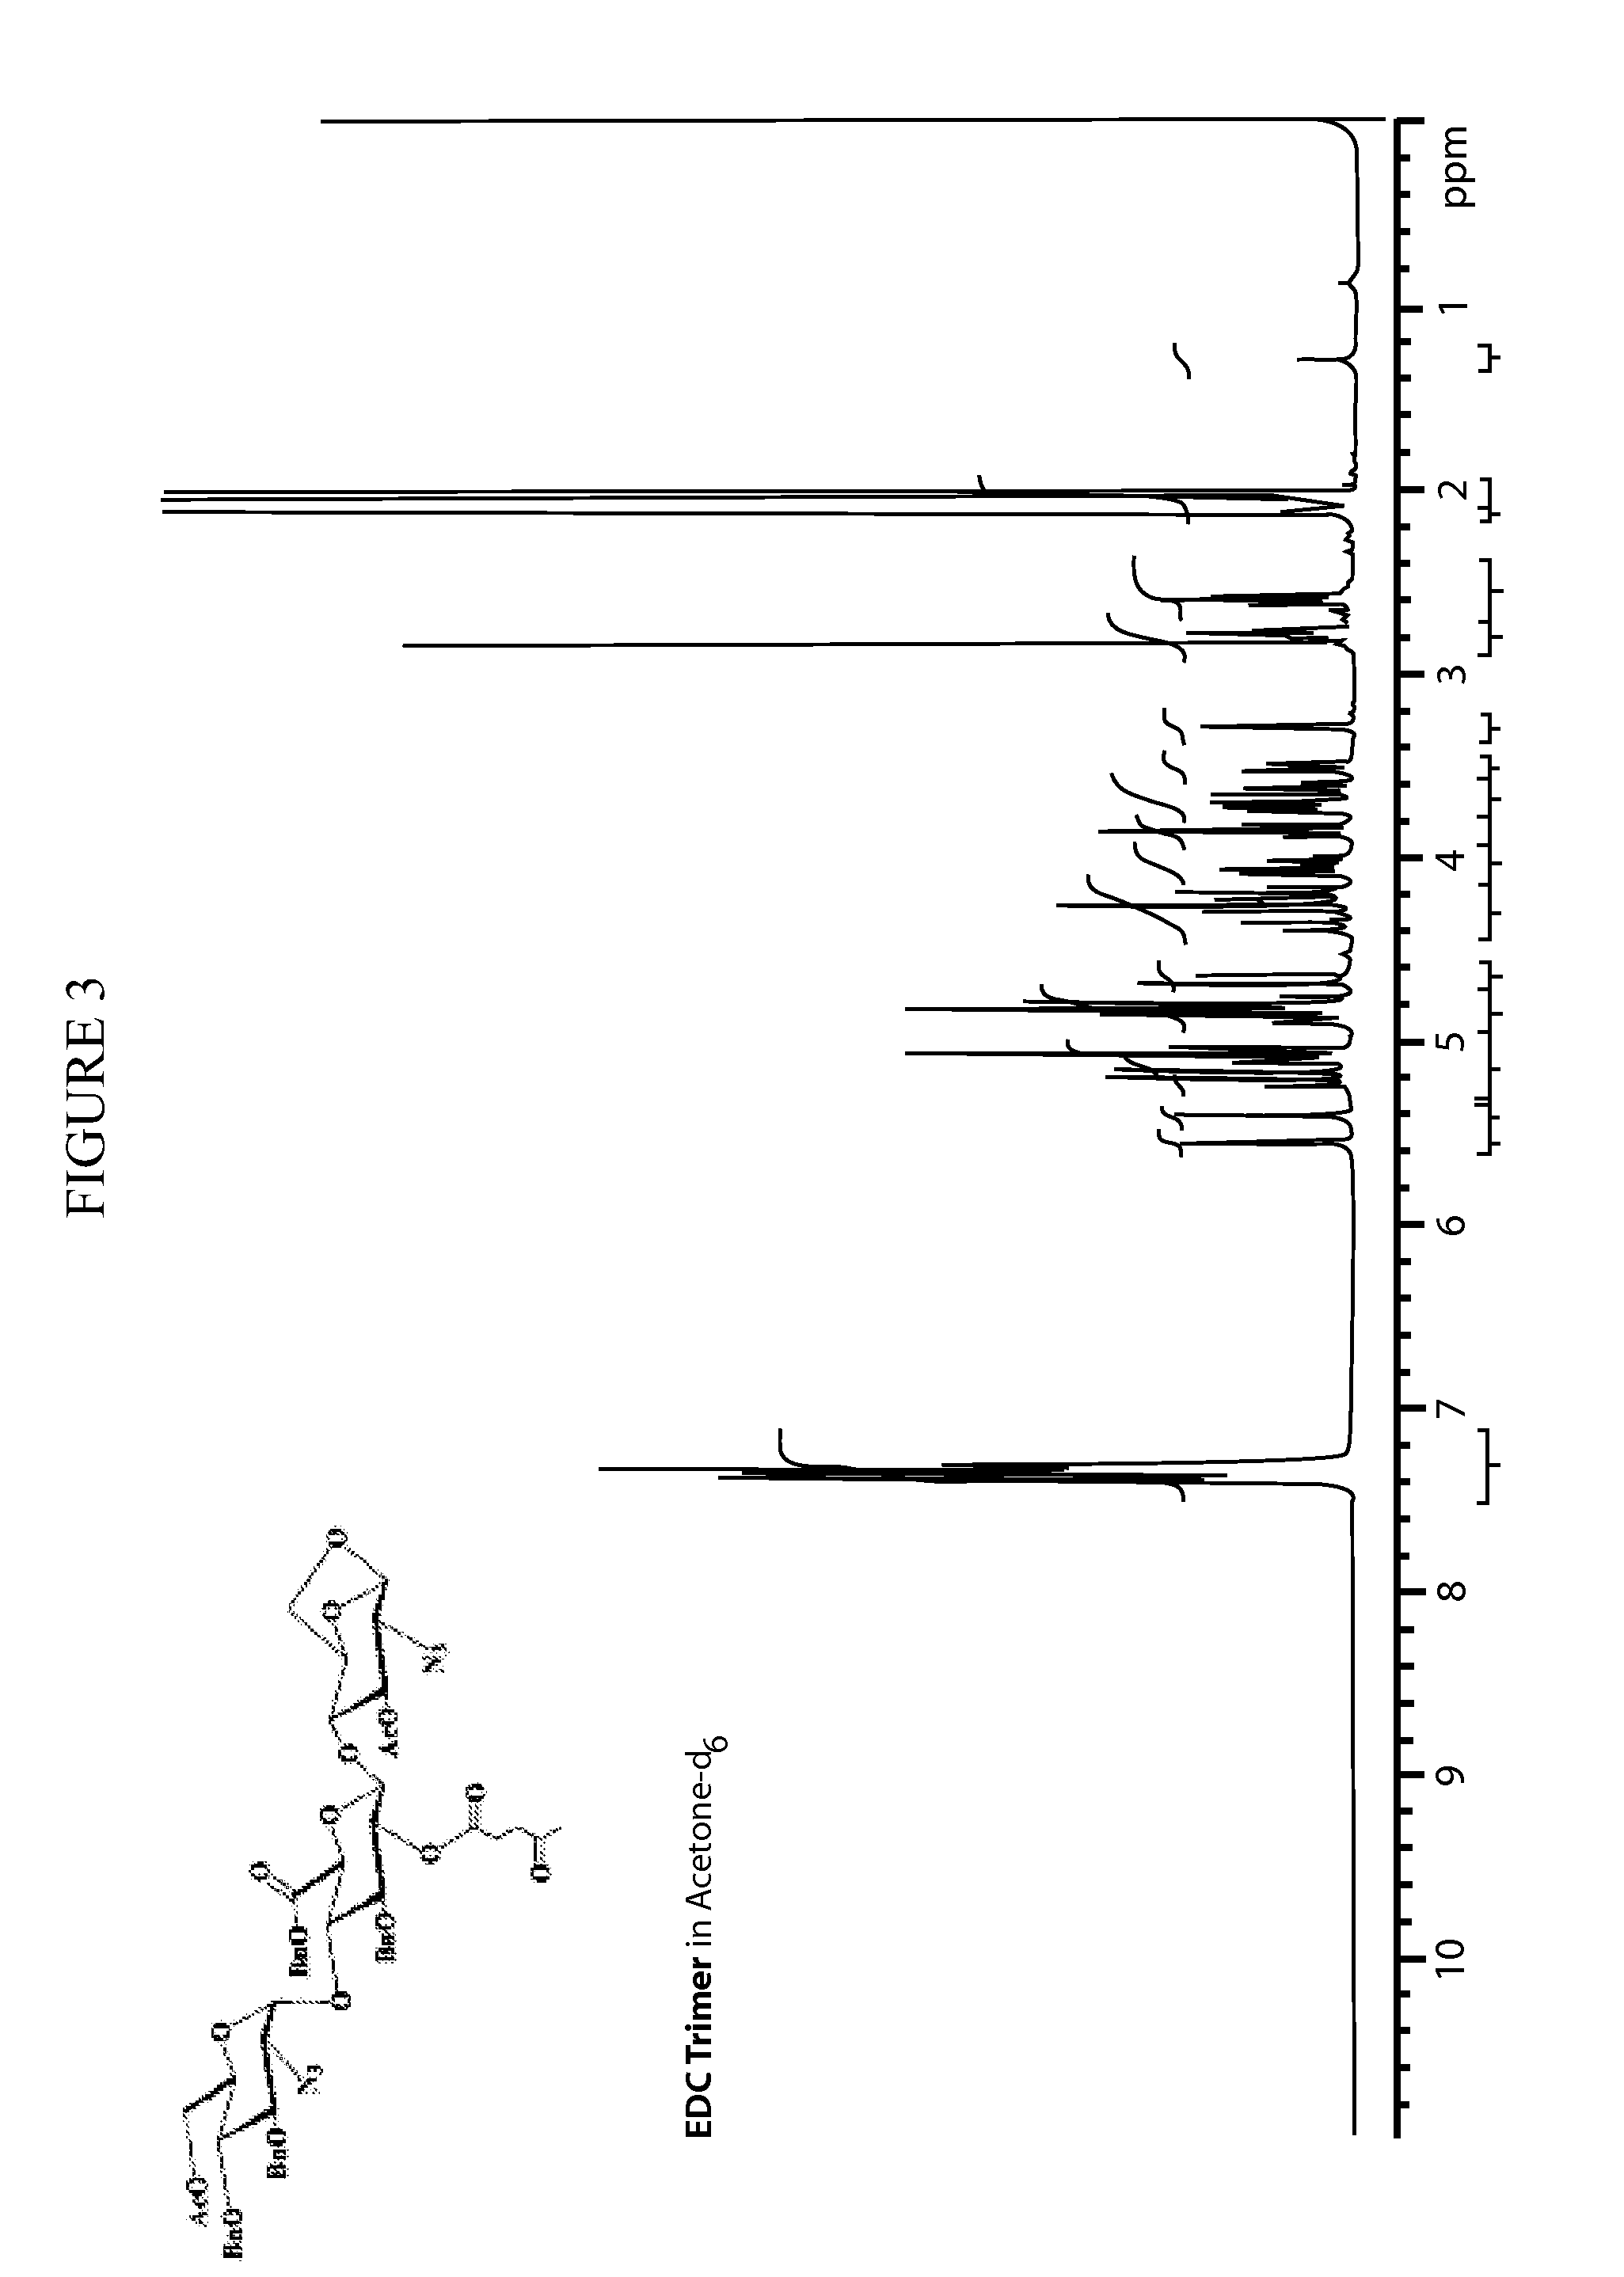 Process for perparing fondaparinux sodium and intermediates useful in the synthesis thereof